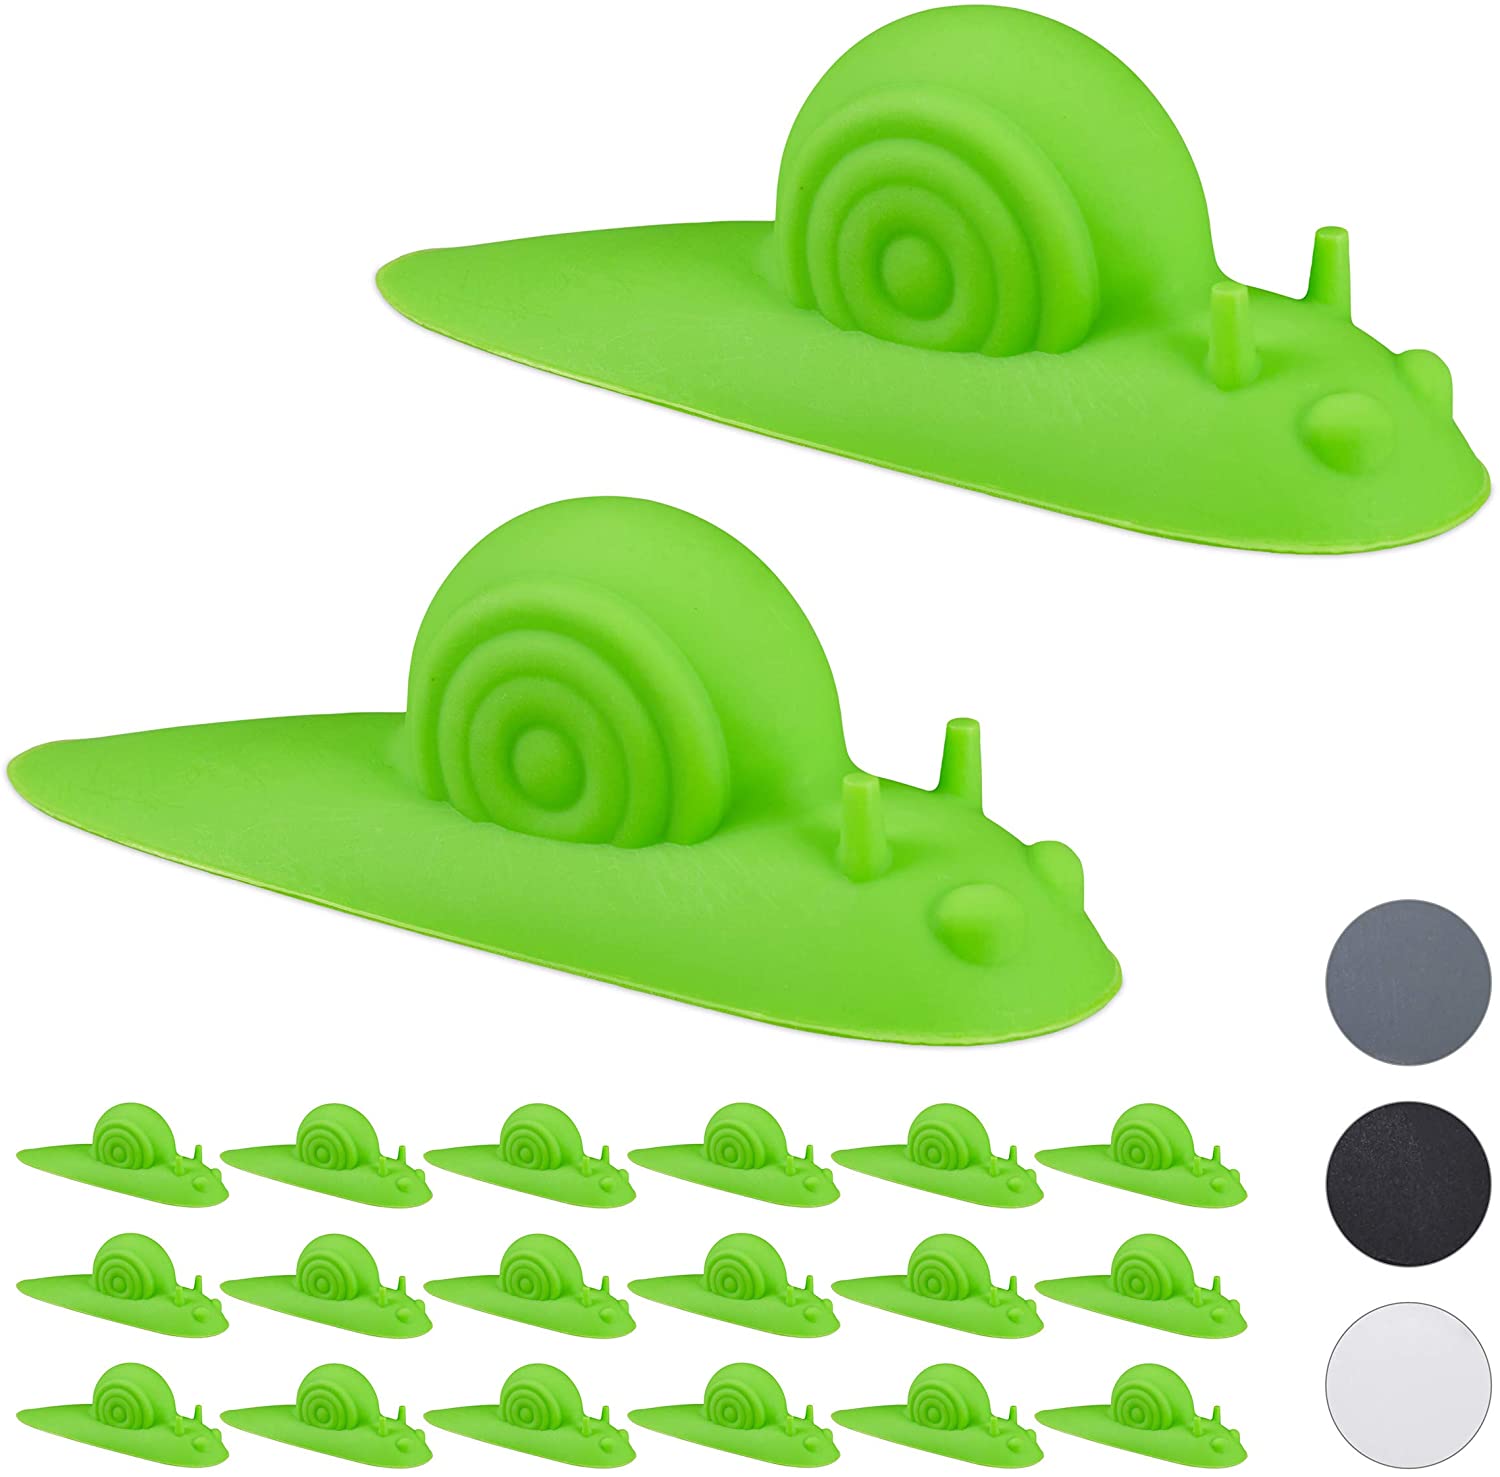 Relaxdays 20 X Door Stoppers Snail Door Wedge Rubber Soft Funny Protects Fl